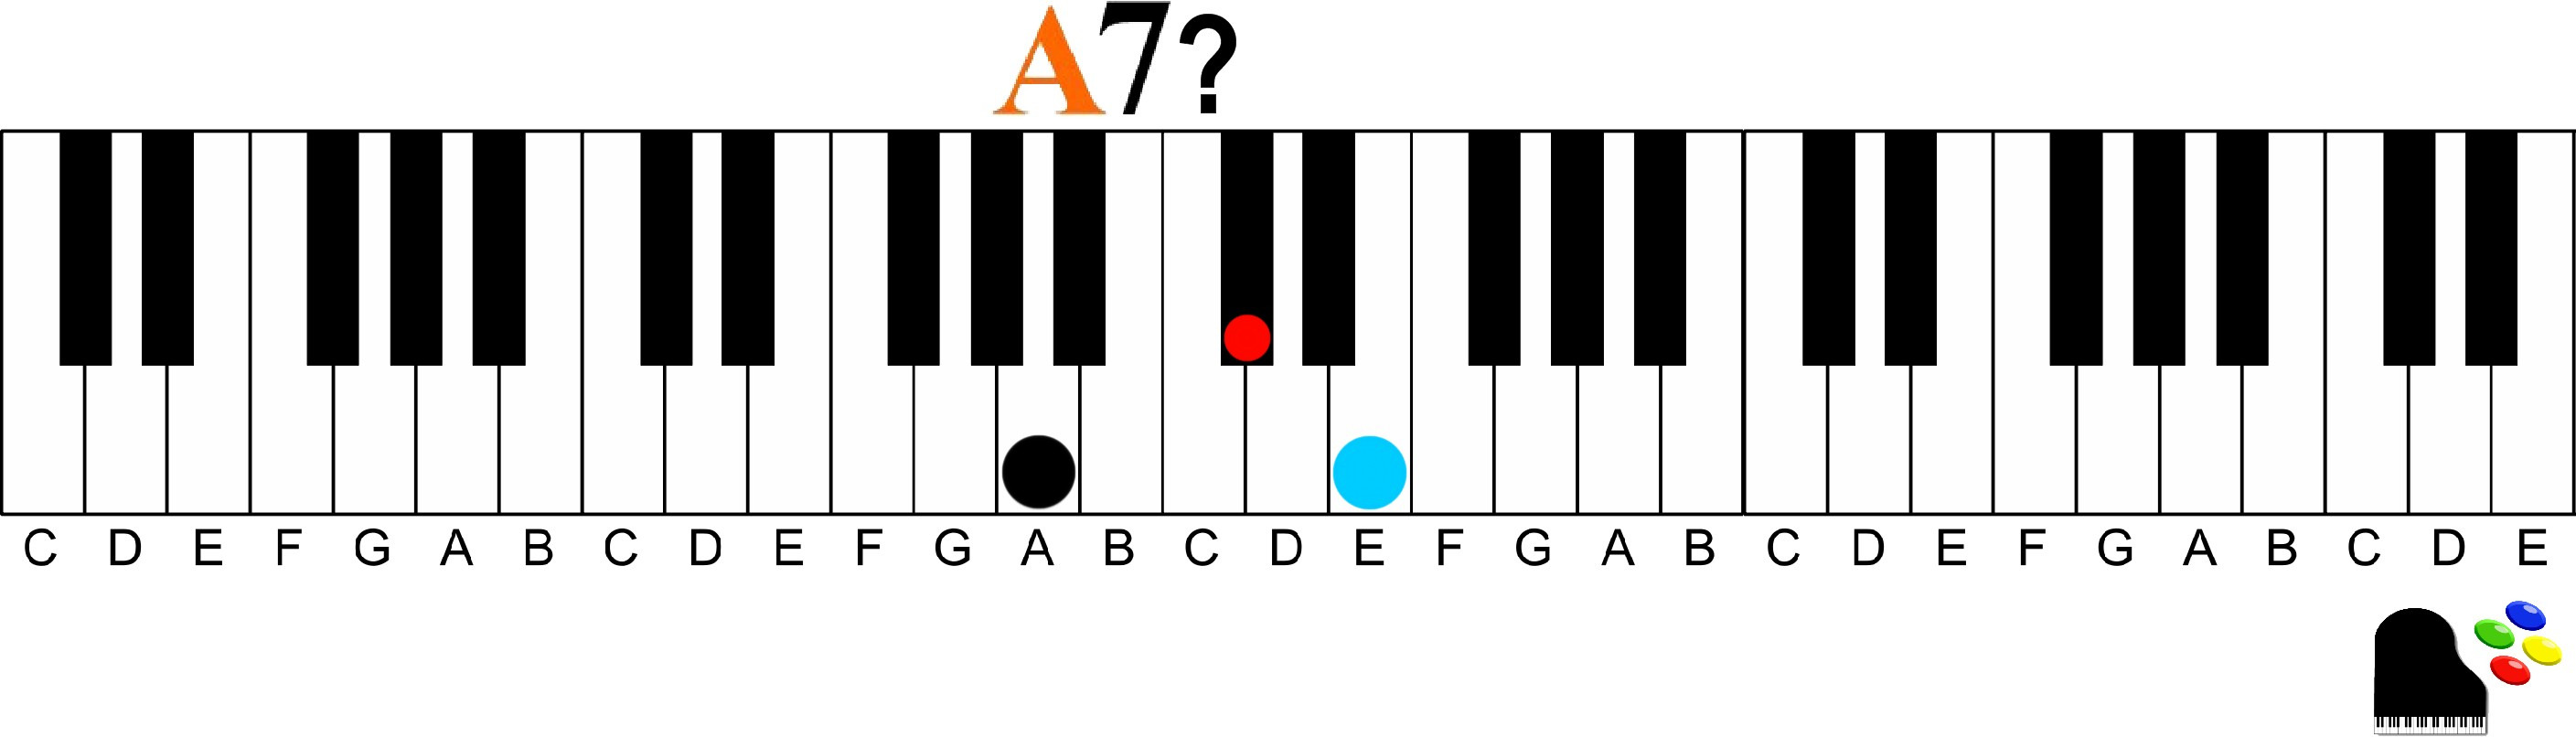 G Chord Piano Play 9th Chords On The Piano How To Understand And Play Them